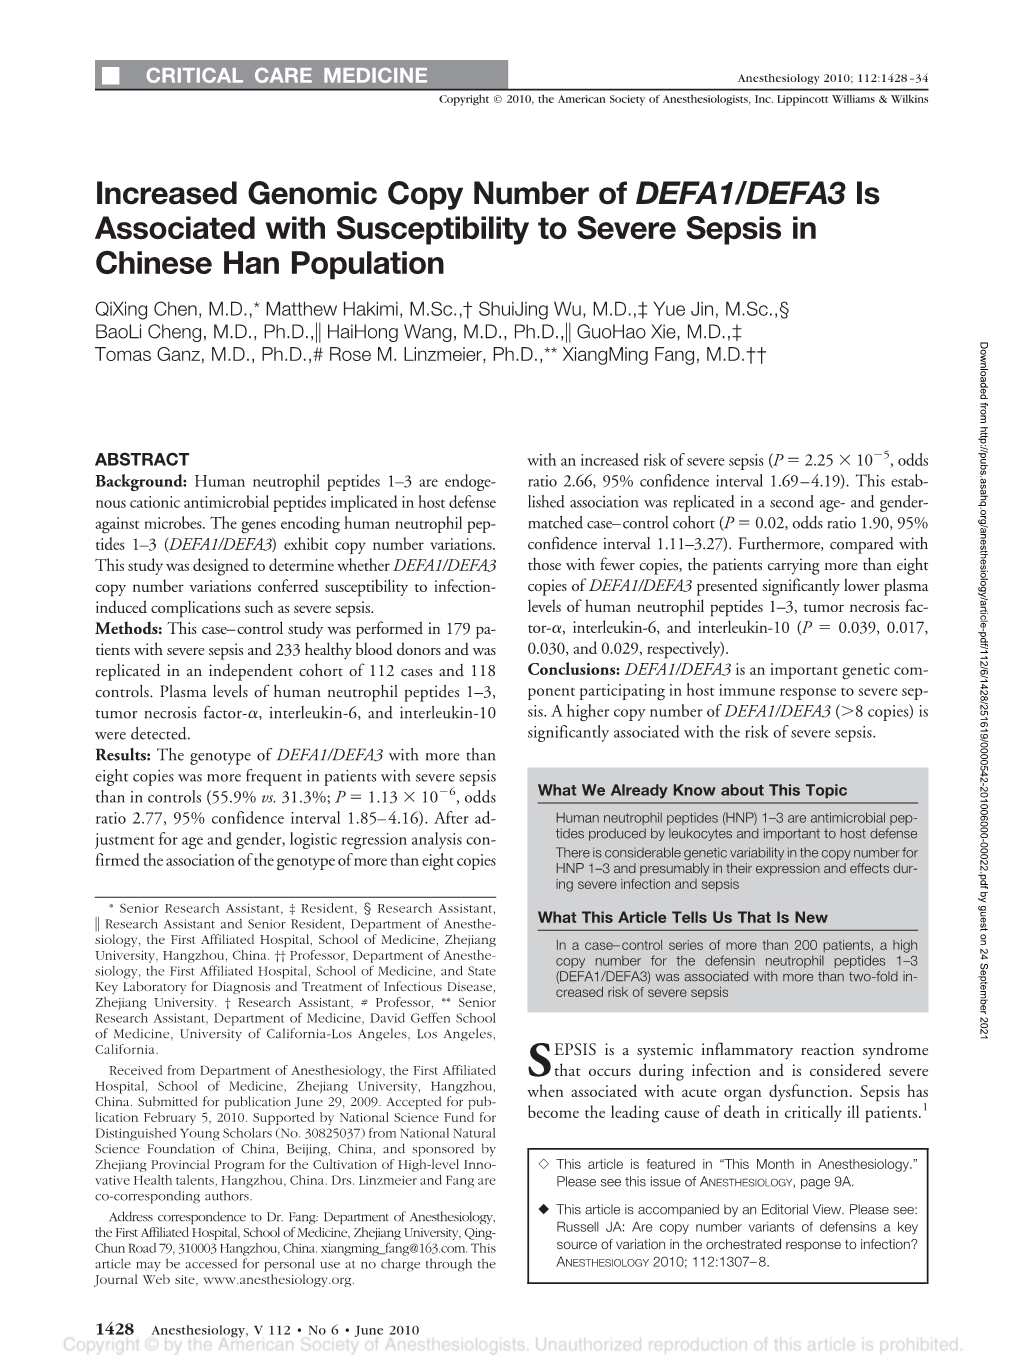 Increased Genomic Copy Number of DEFA1/DEFA3 Is Associated with Susceptibility to Severe Sepsis in Chinese Han Population